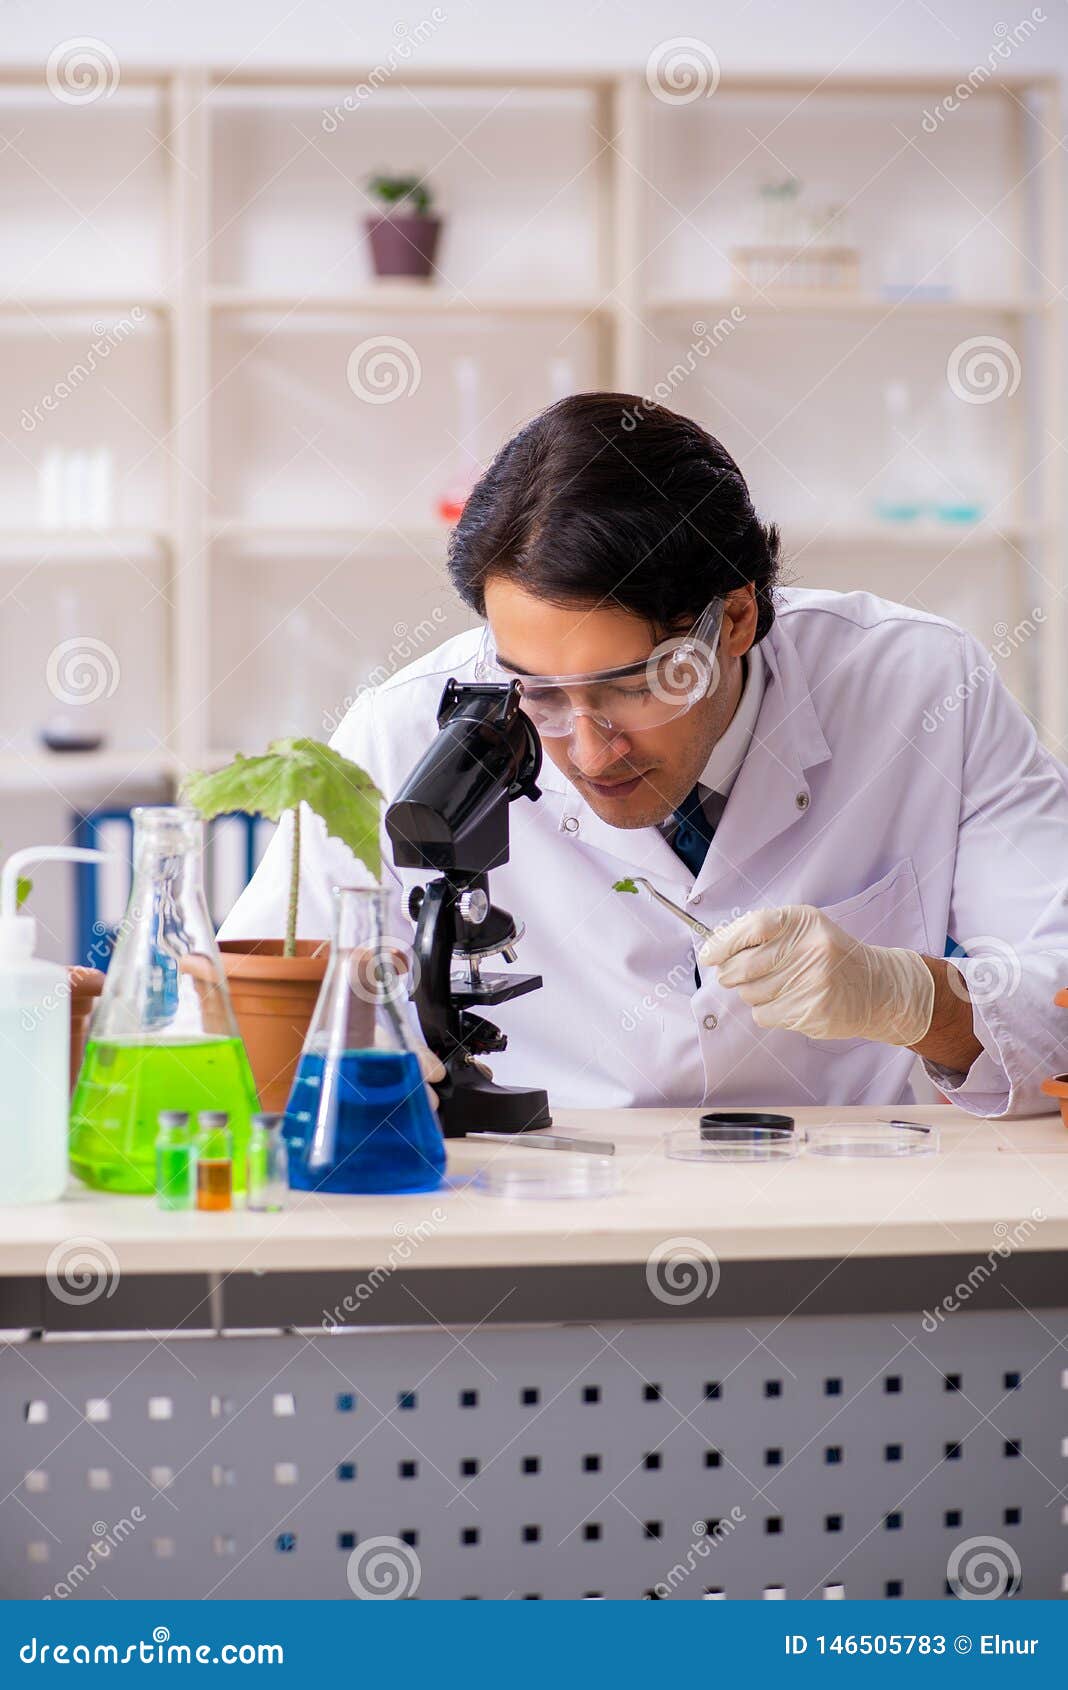 The Biotechnology Chemist Working in Lab Stock Image Image of